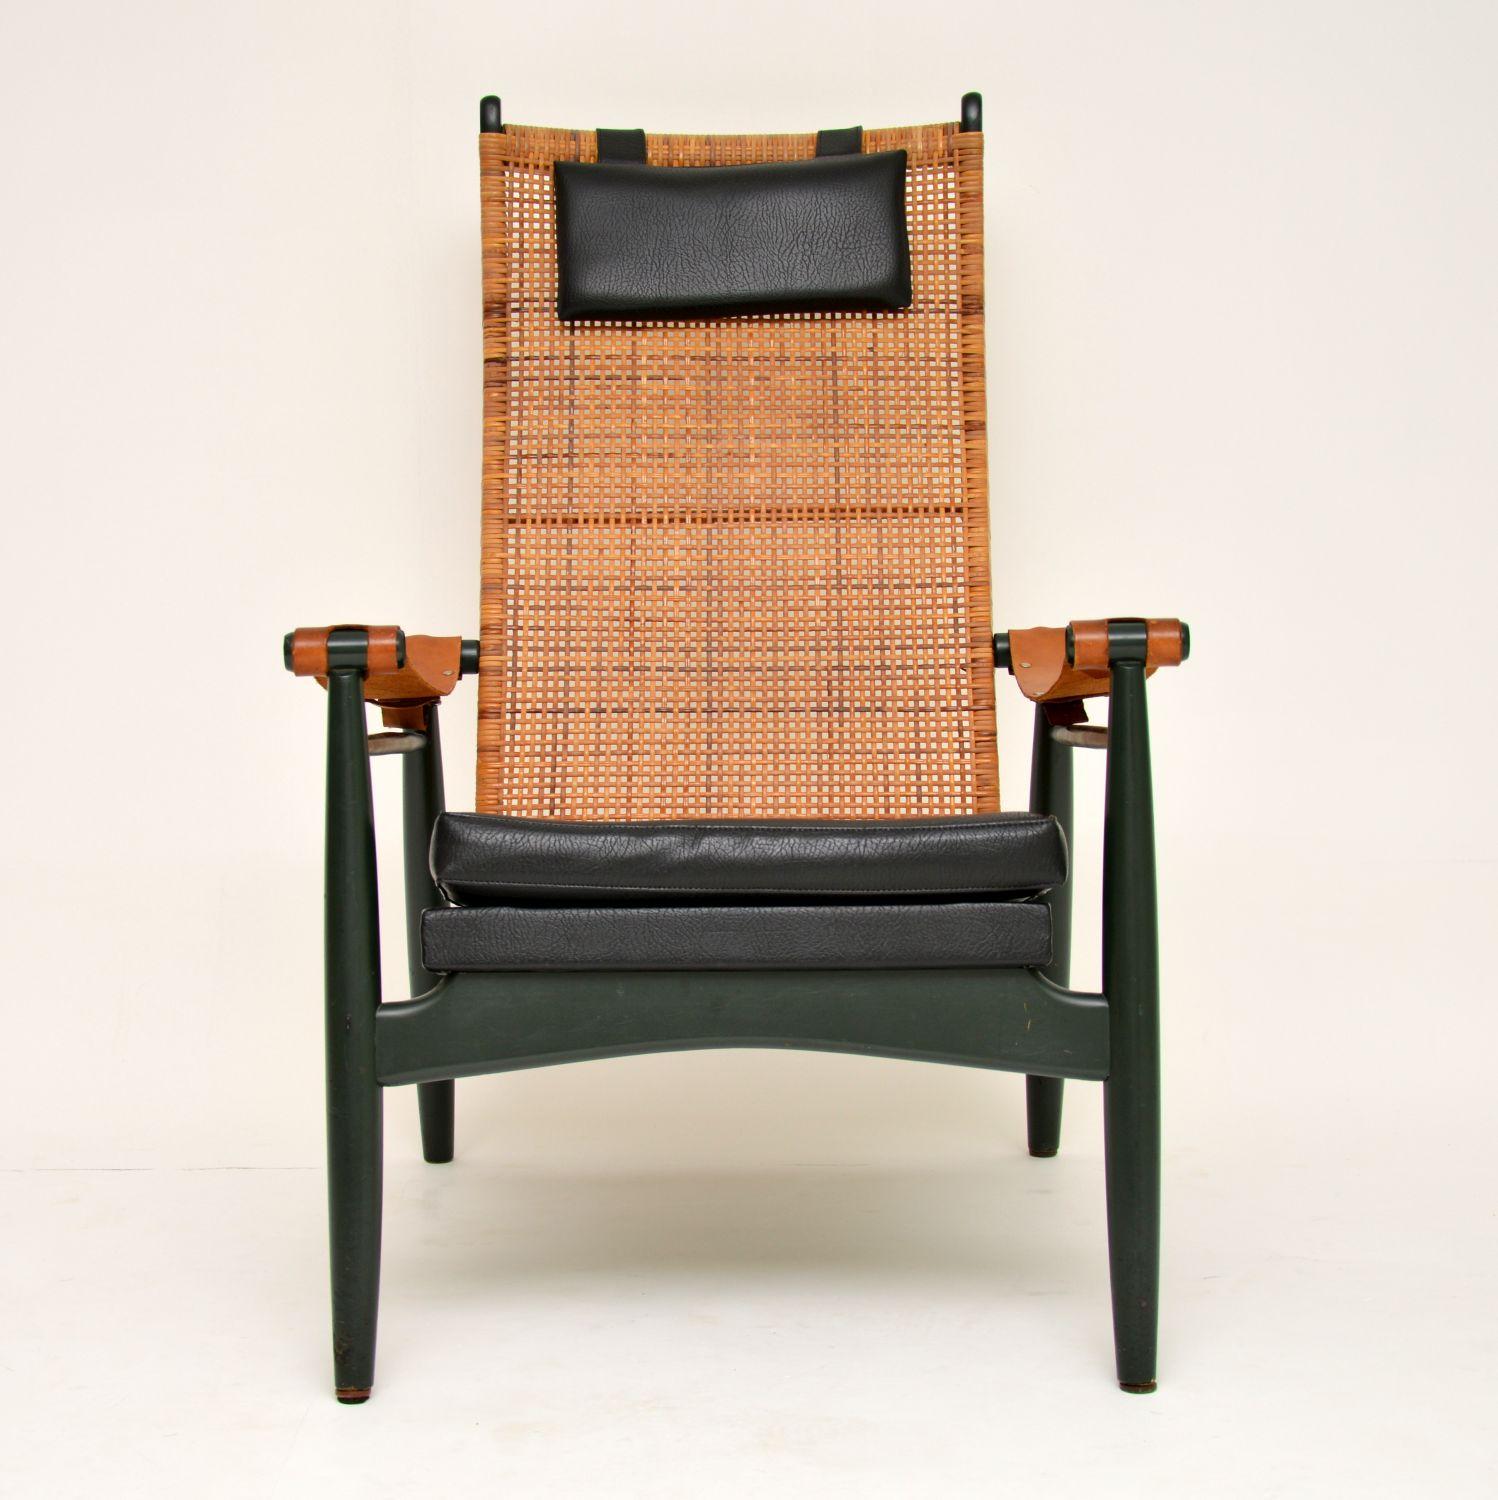 A very stylish and extremely comfortable vintage armchair made in Holland during the 1960s. This was designed by PJ Muntendam, and was made by Jonkers. This has an interesting combination of materials; a green wooden frame, tan leather armrests,